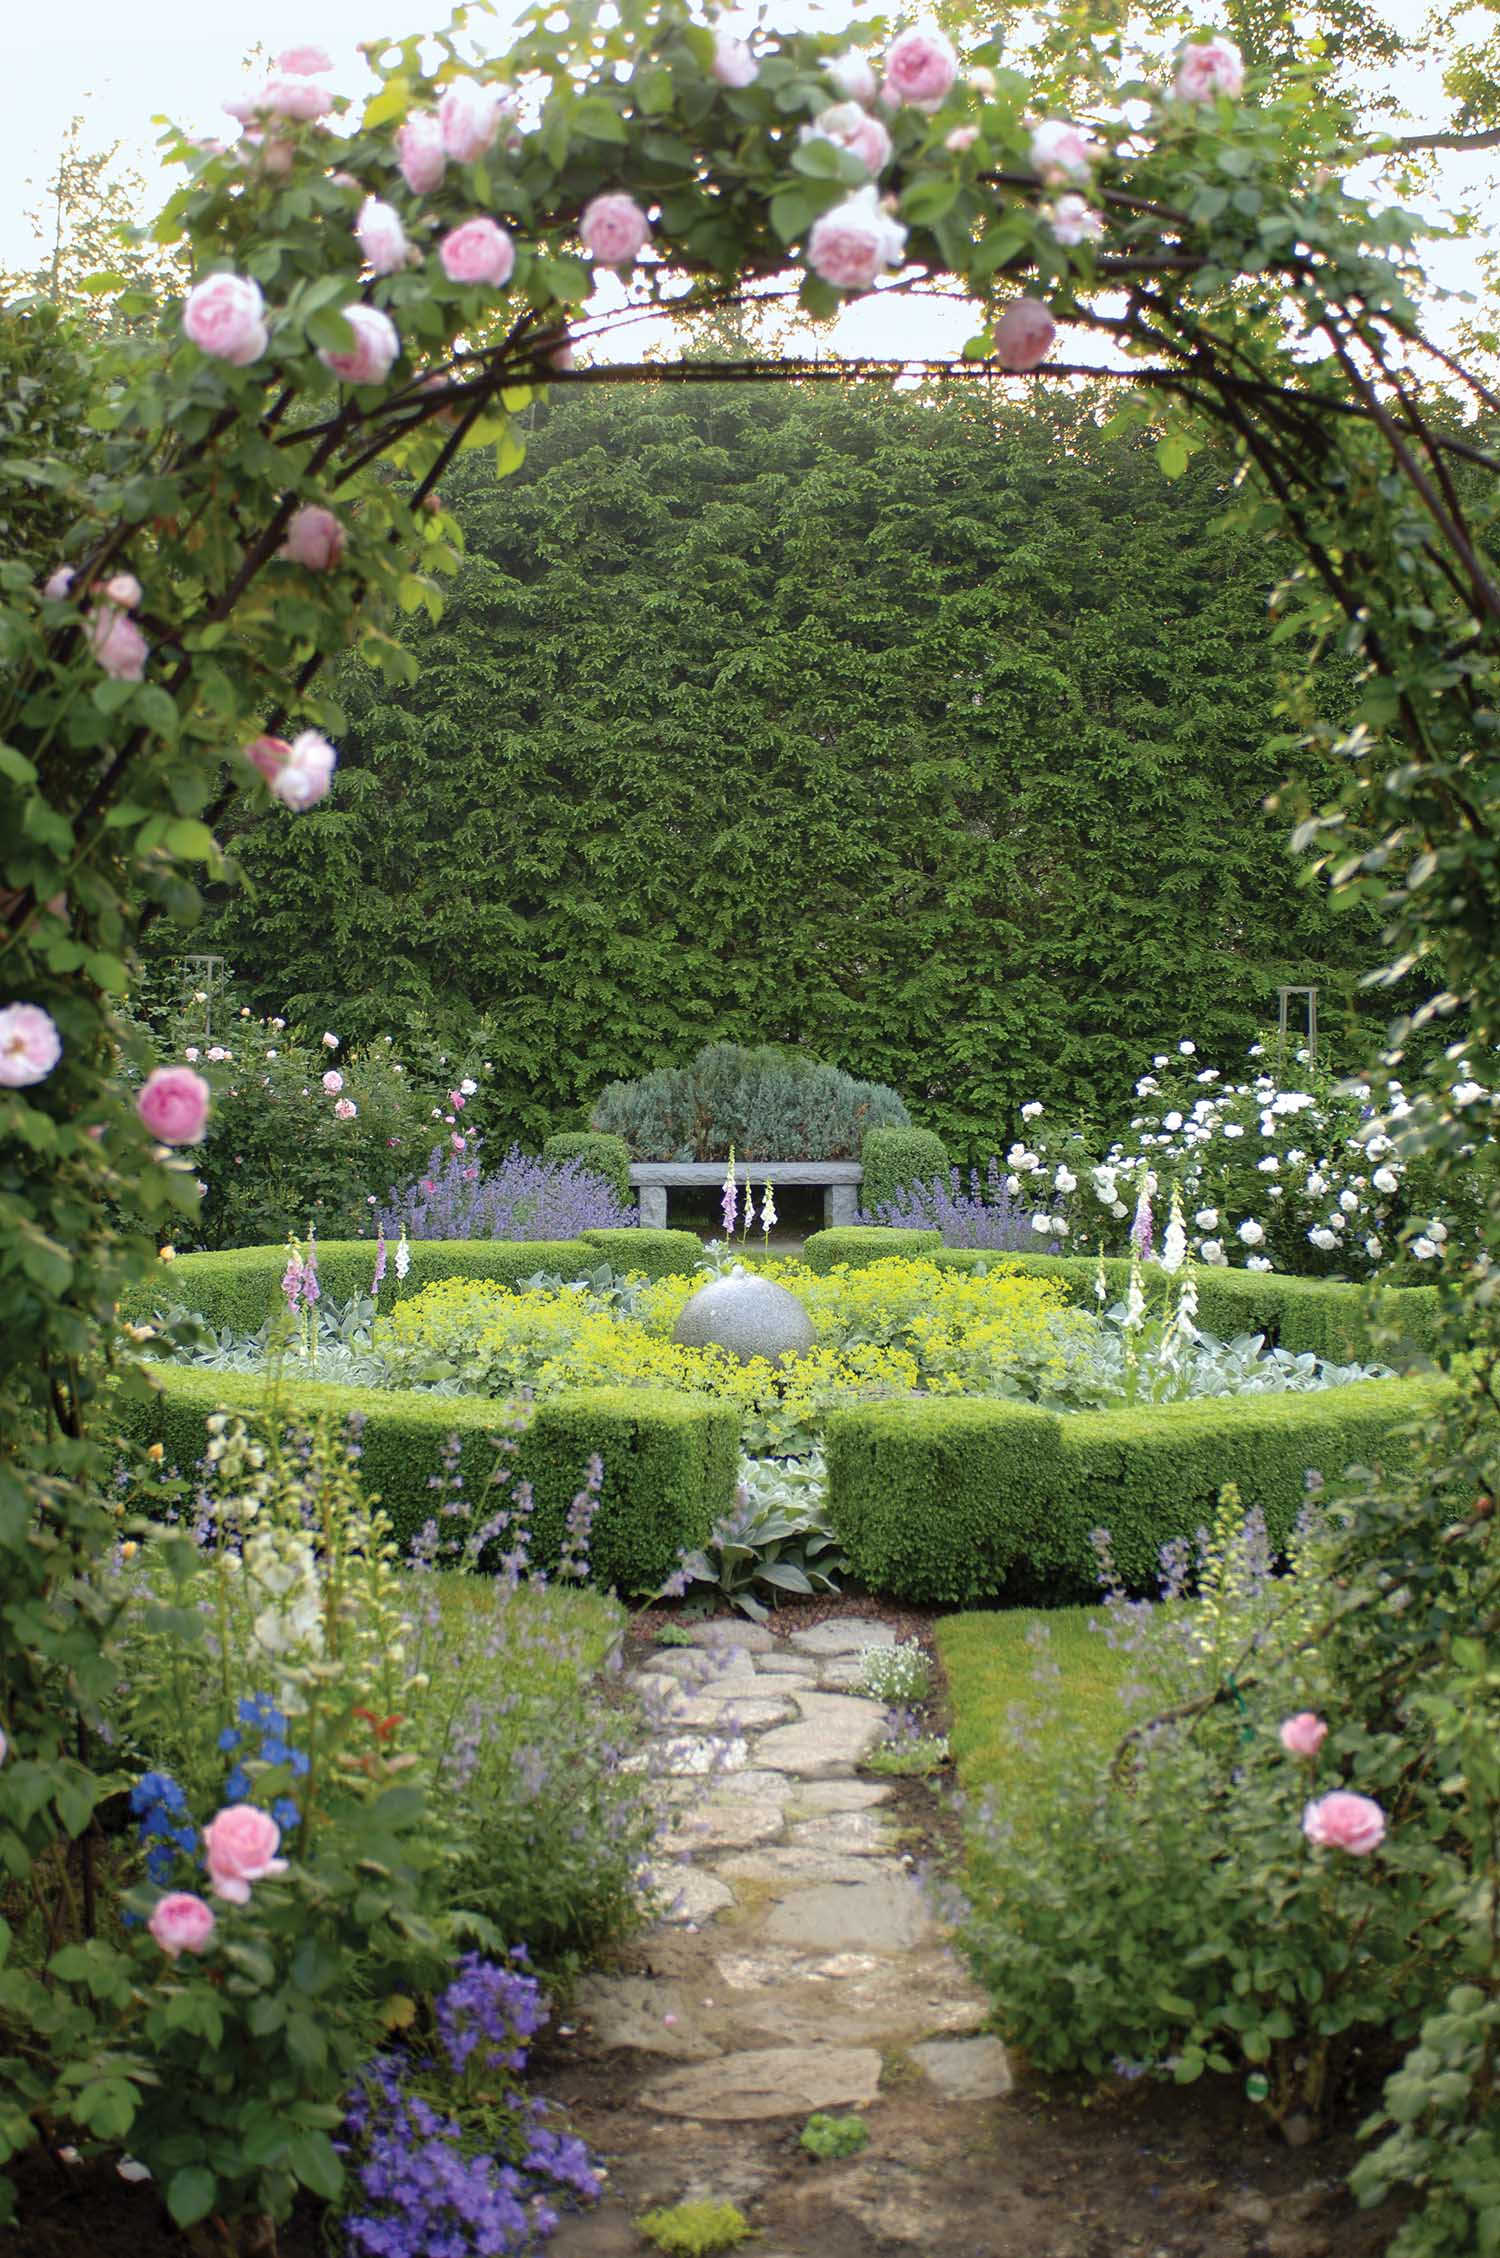 An arch of roses opens the entrance to a green garden.